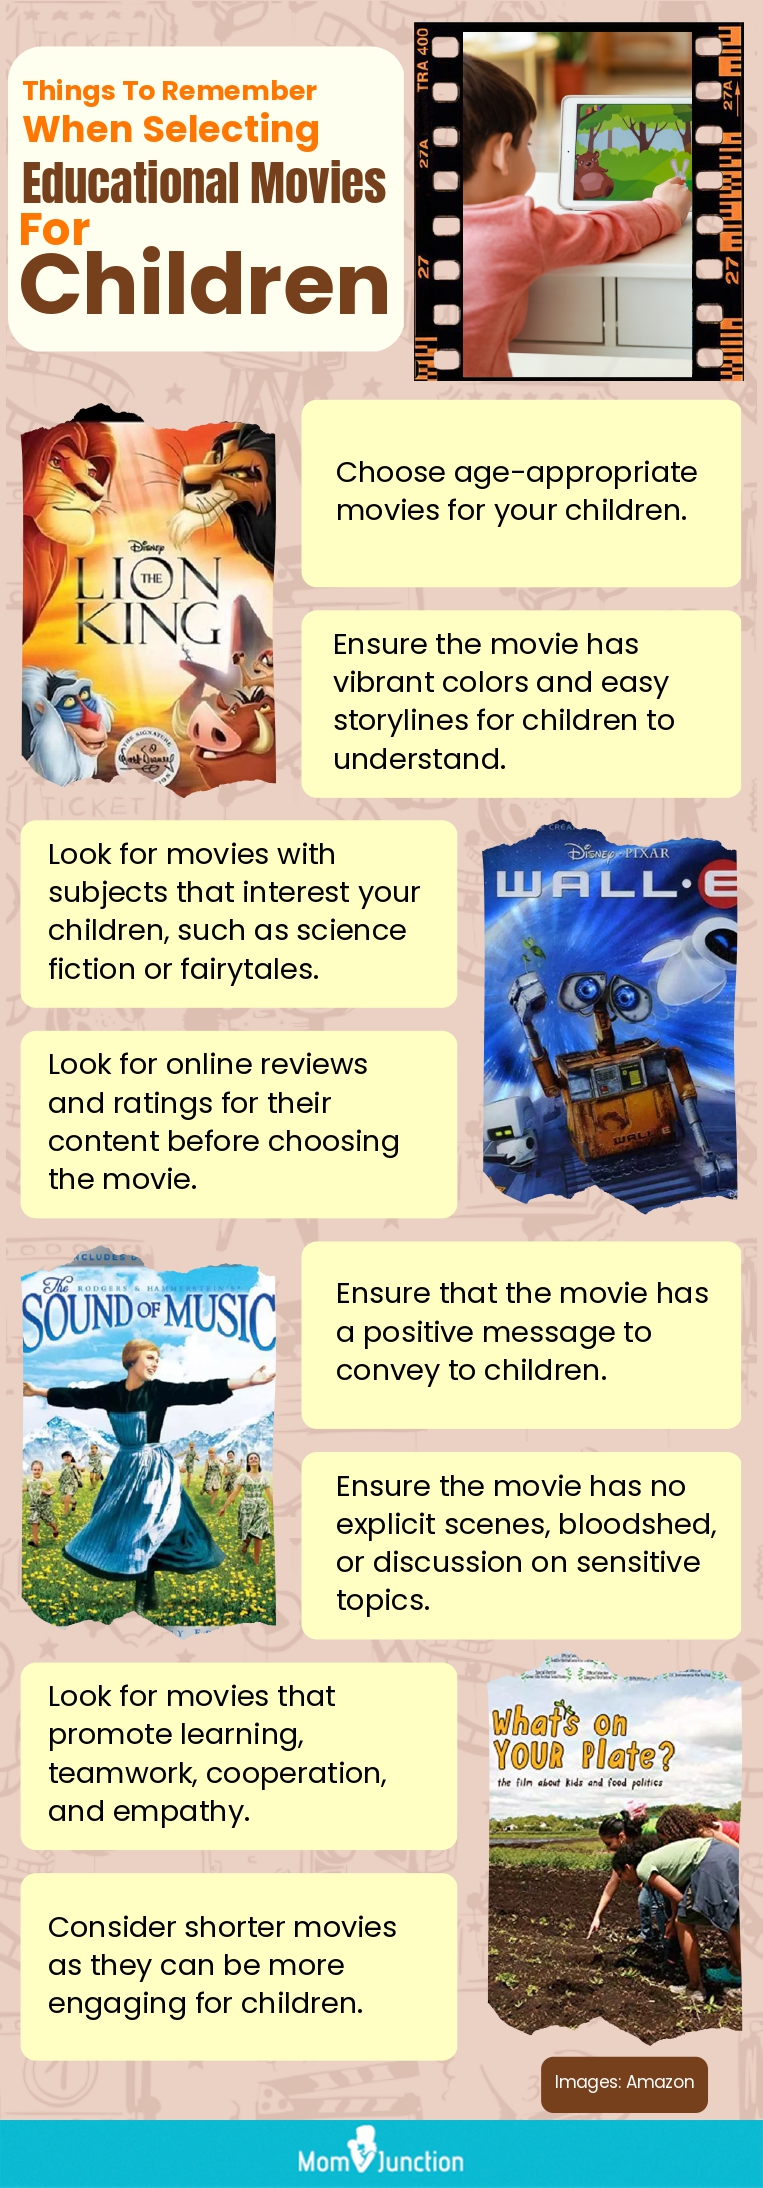 Things To Remember When Selecting Educational Movies For Children (infographic)